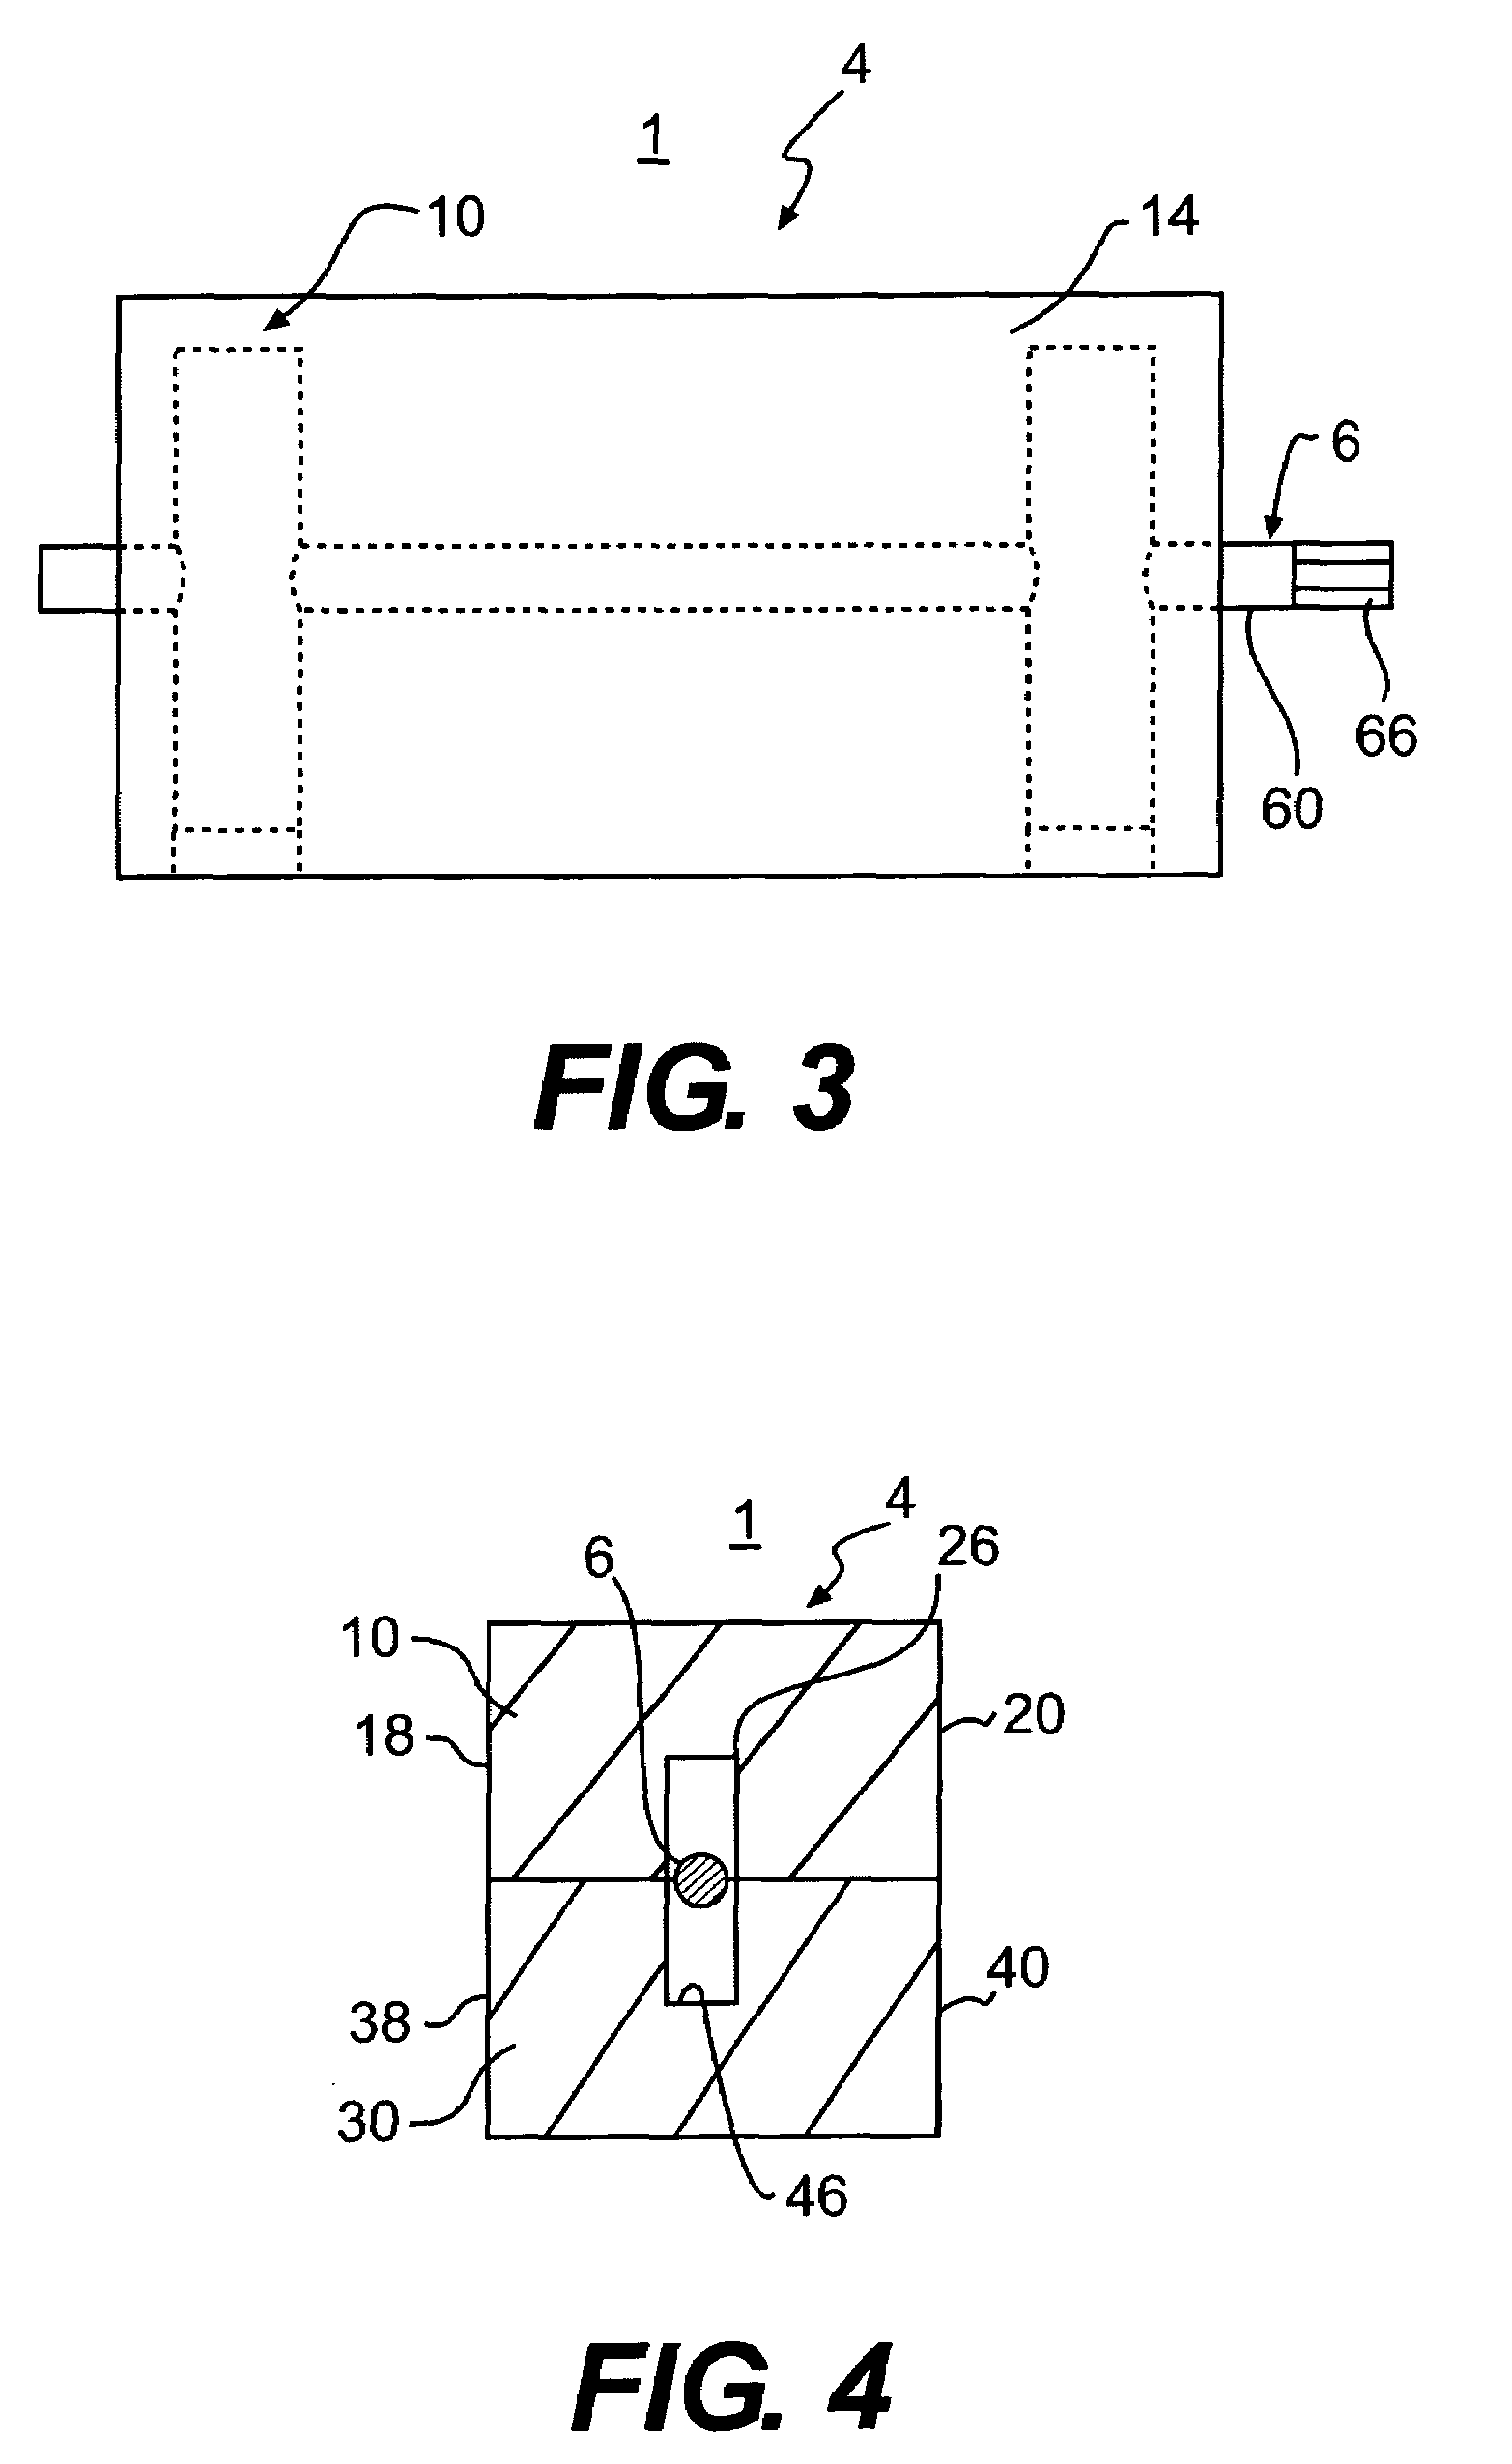 Universal adjustable spacer assembly